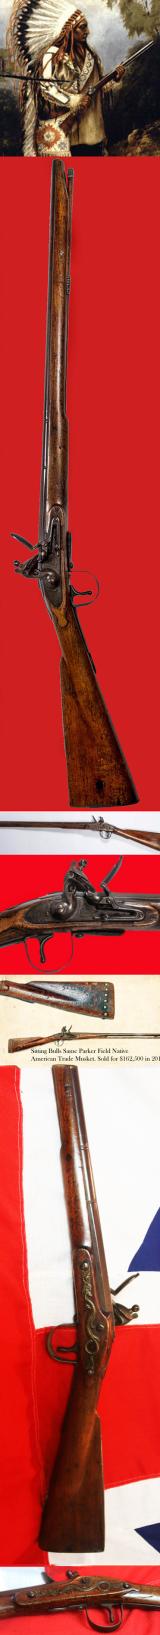 An Original & Rare Flintlock 'Chief's Grade' Hudson’s Bay Co. Trade Musket. The Identical Form of Parker Field Trade Musket Used By Chief Sitting Bull of The Little Big Horn